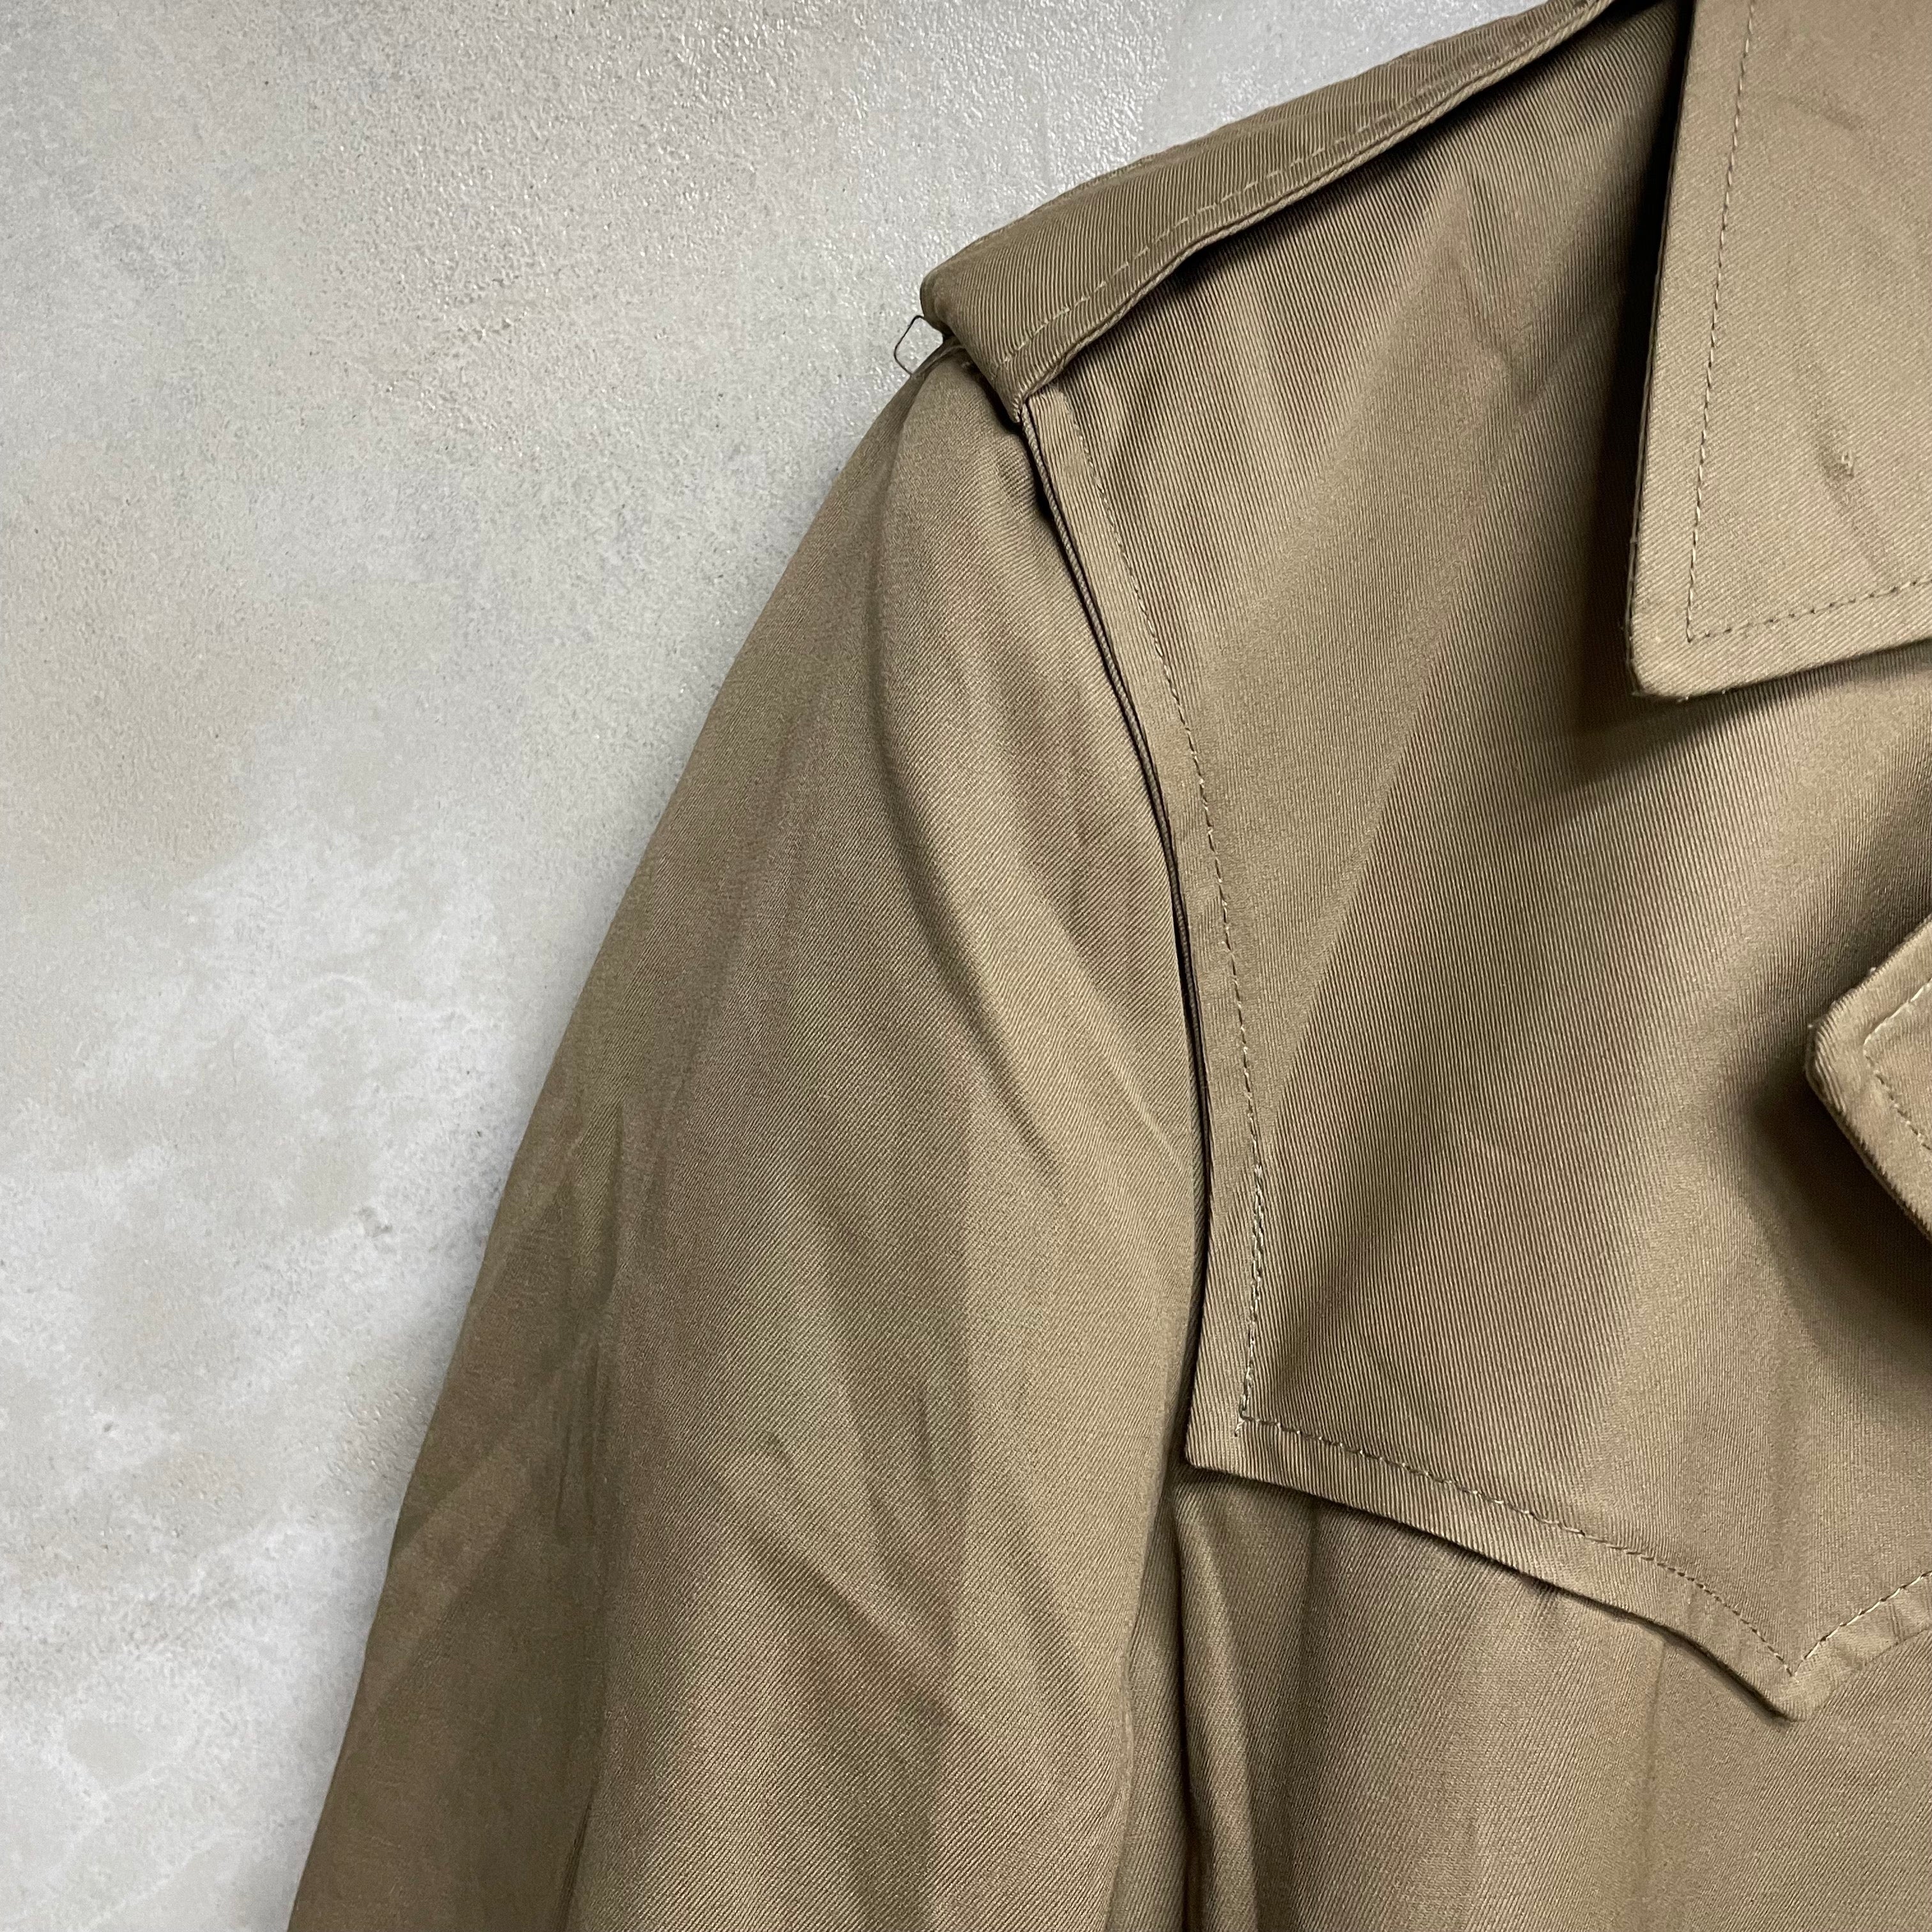 [ ONLY ONE ! ] ITALIAN Air Force TRENCH COAT / ITALIAN ARMY